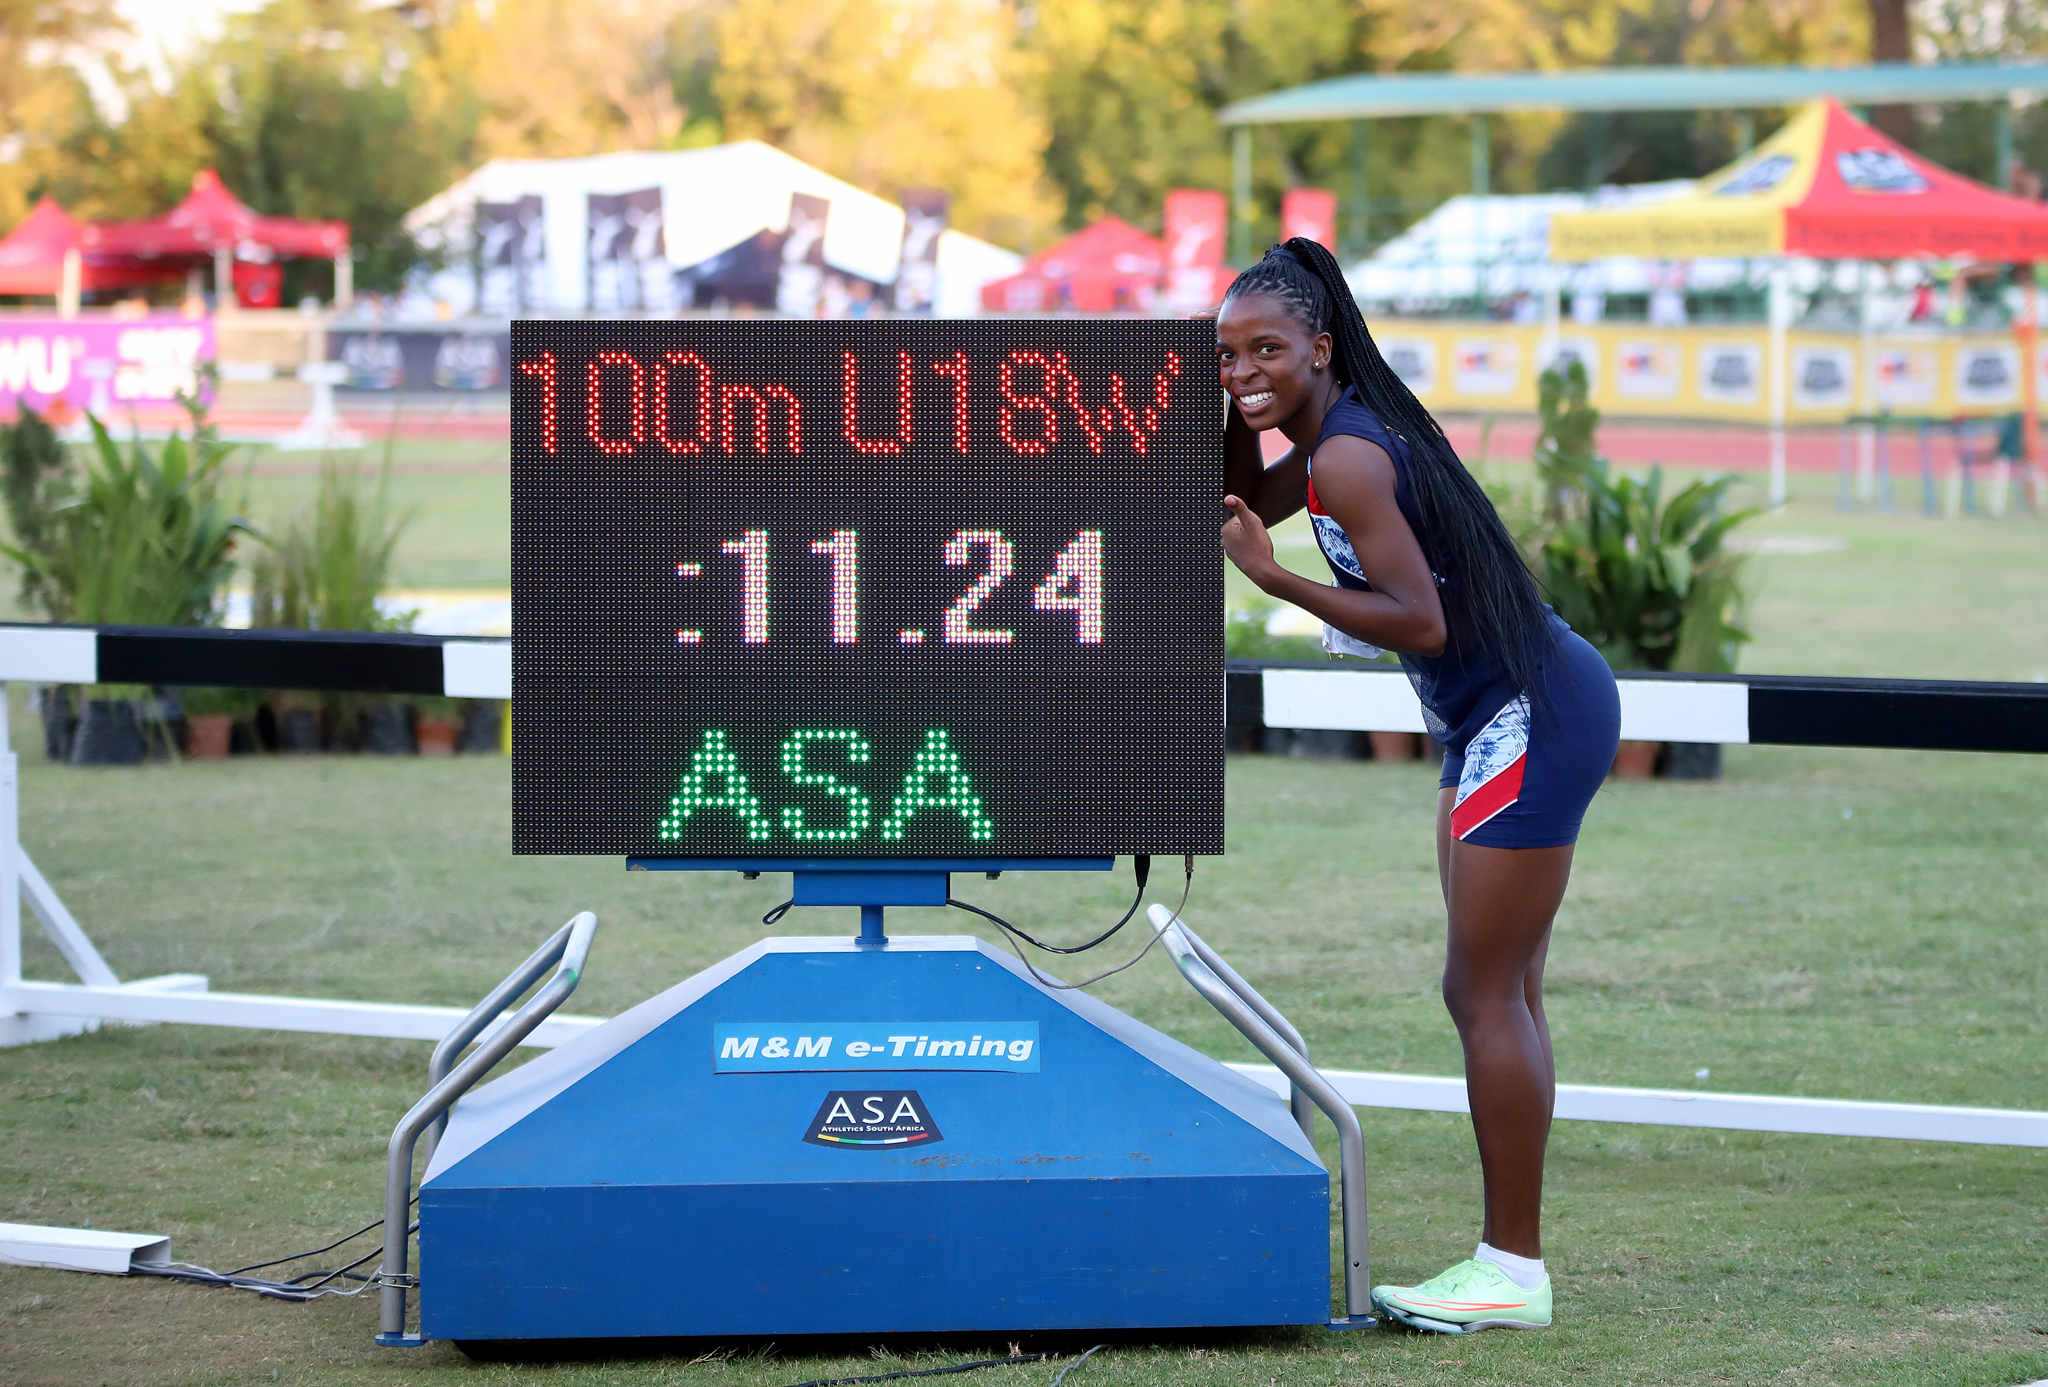 Viwe Jingqi broke the 100m women’s U18 national record three times in one day at the opening of ASA U16 (Sub-Youth), U18 (Youth) and U20 (Junior) T&F National Championships / Photo credit: Cecilia van Bers